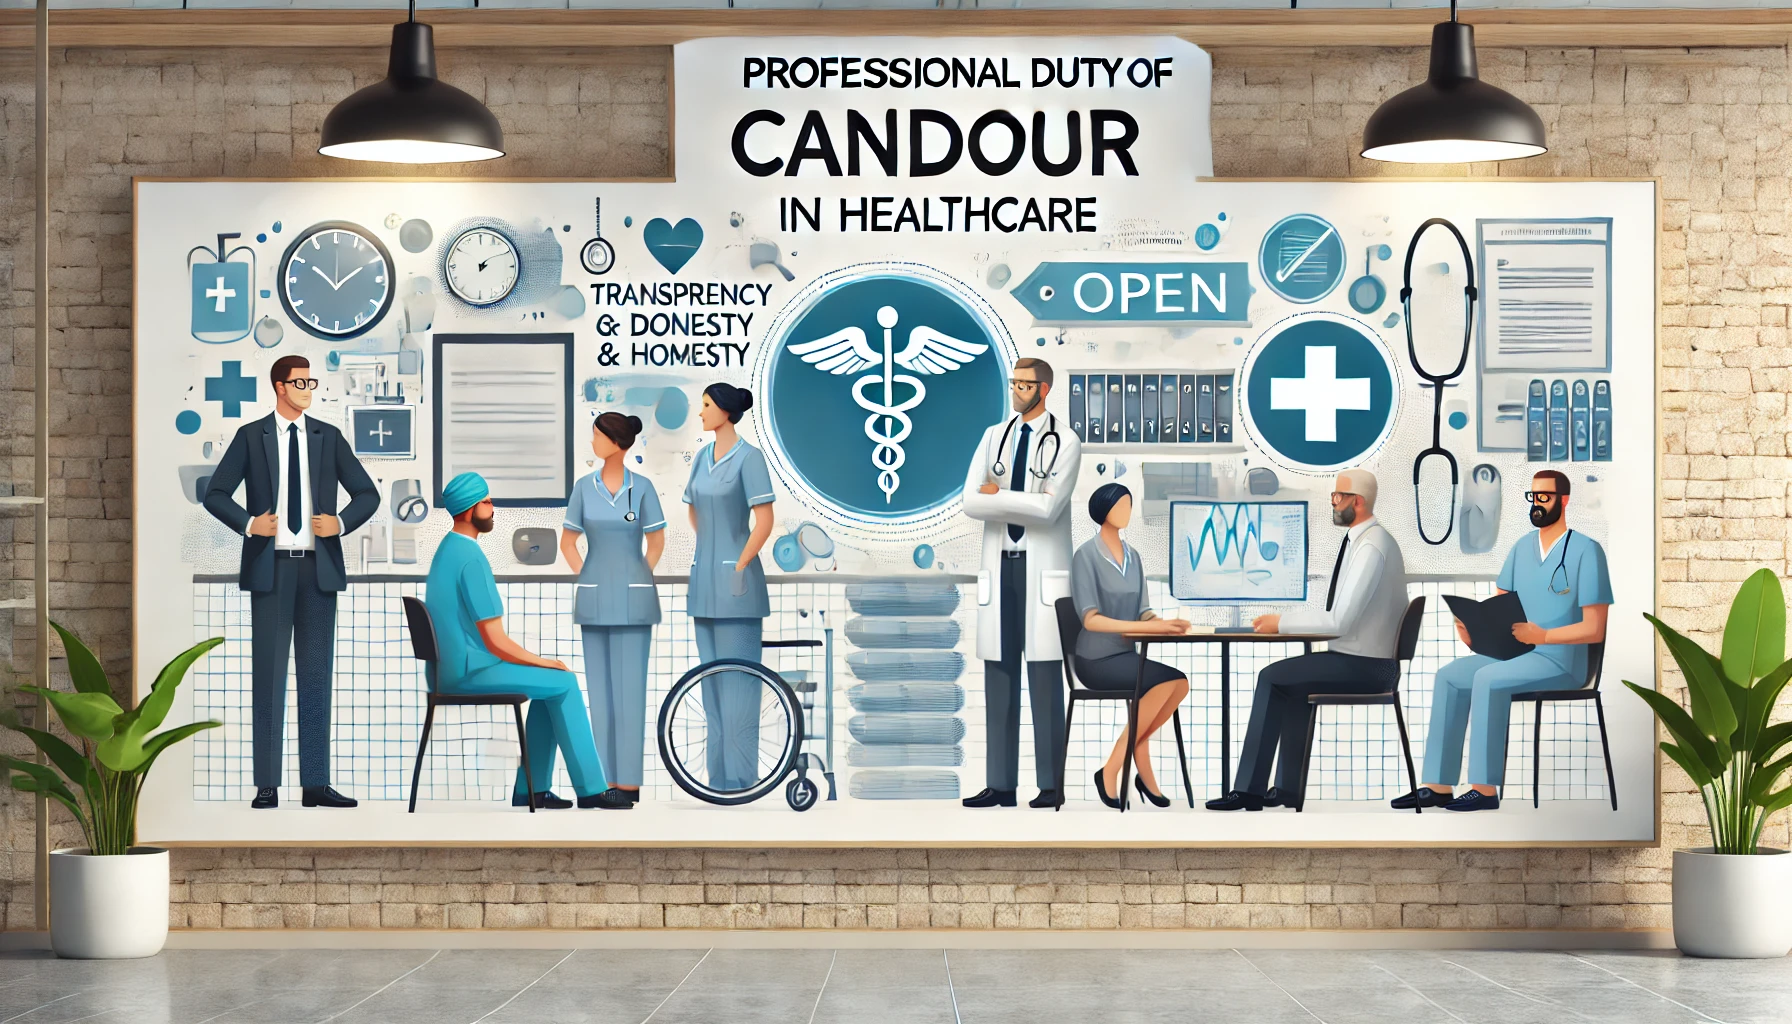 Understanding the Difference Between Statutory and Professional Duty of Candour in Healthcare